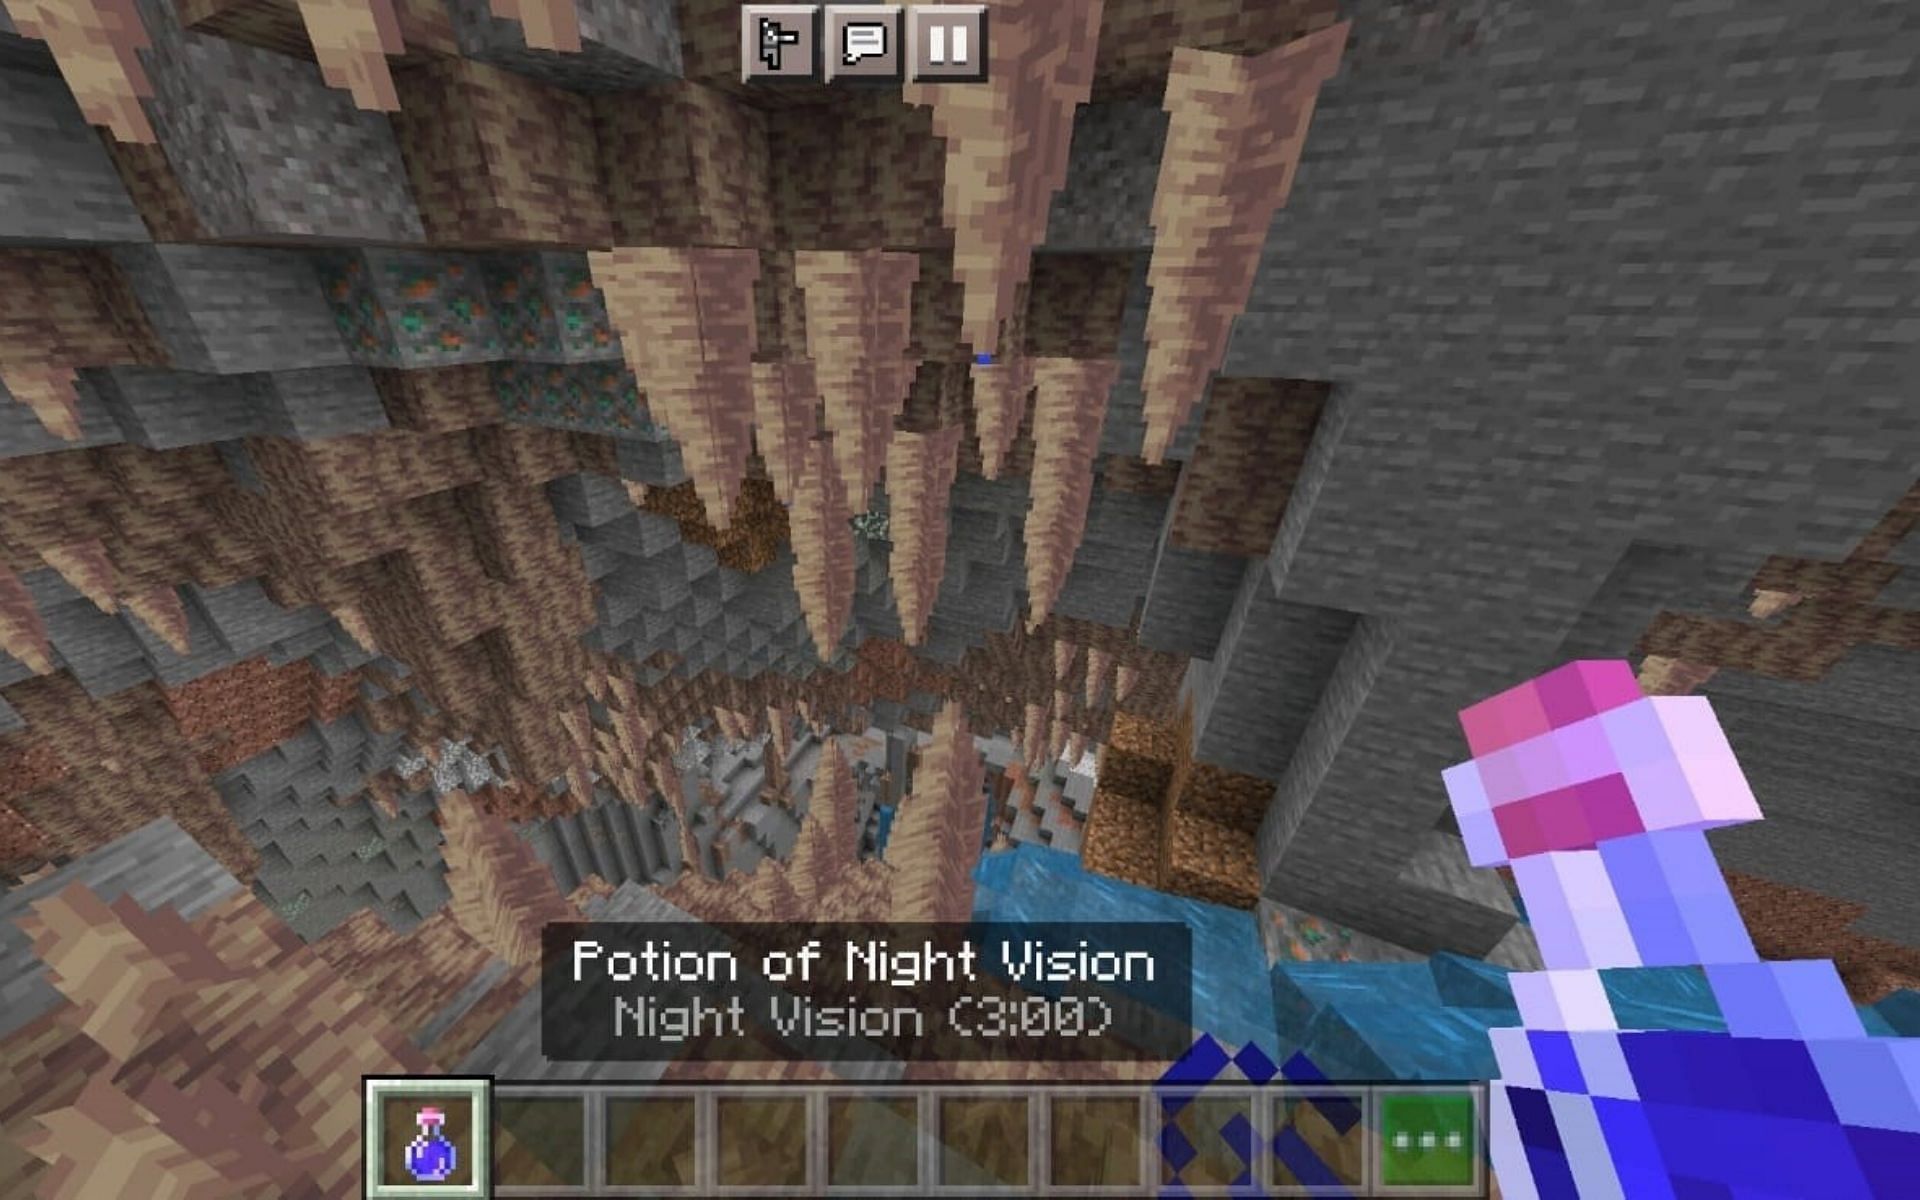 Dripstone Cave view after consuming Night Vision potion (Image via Minecraft)